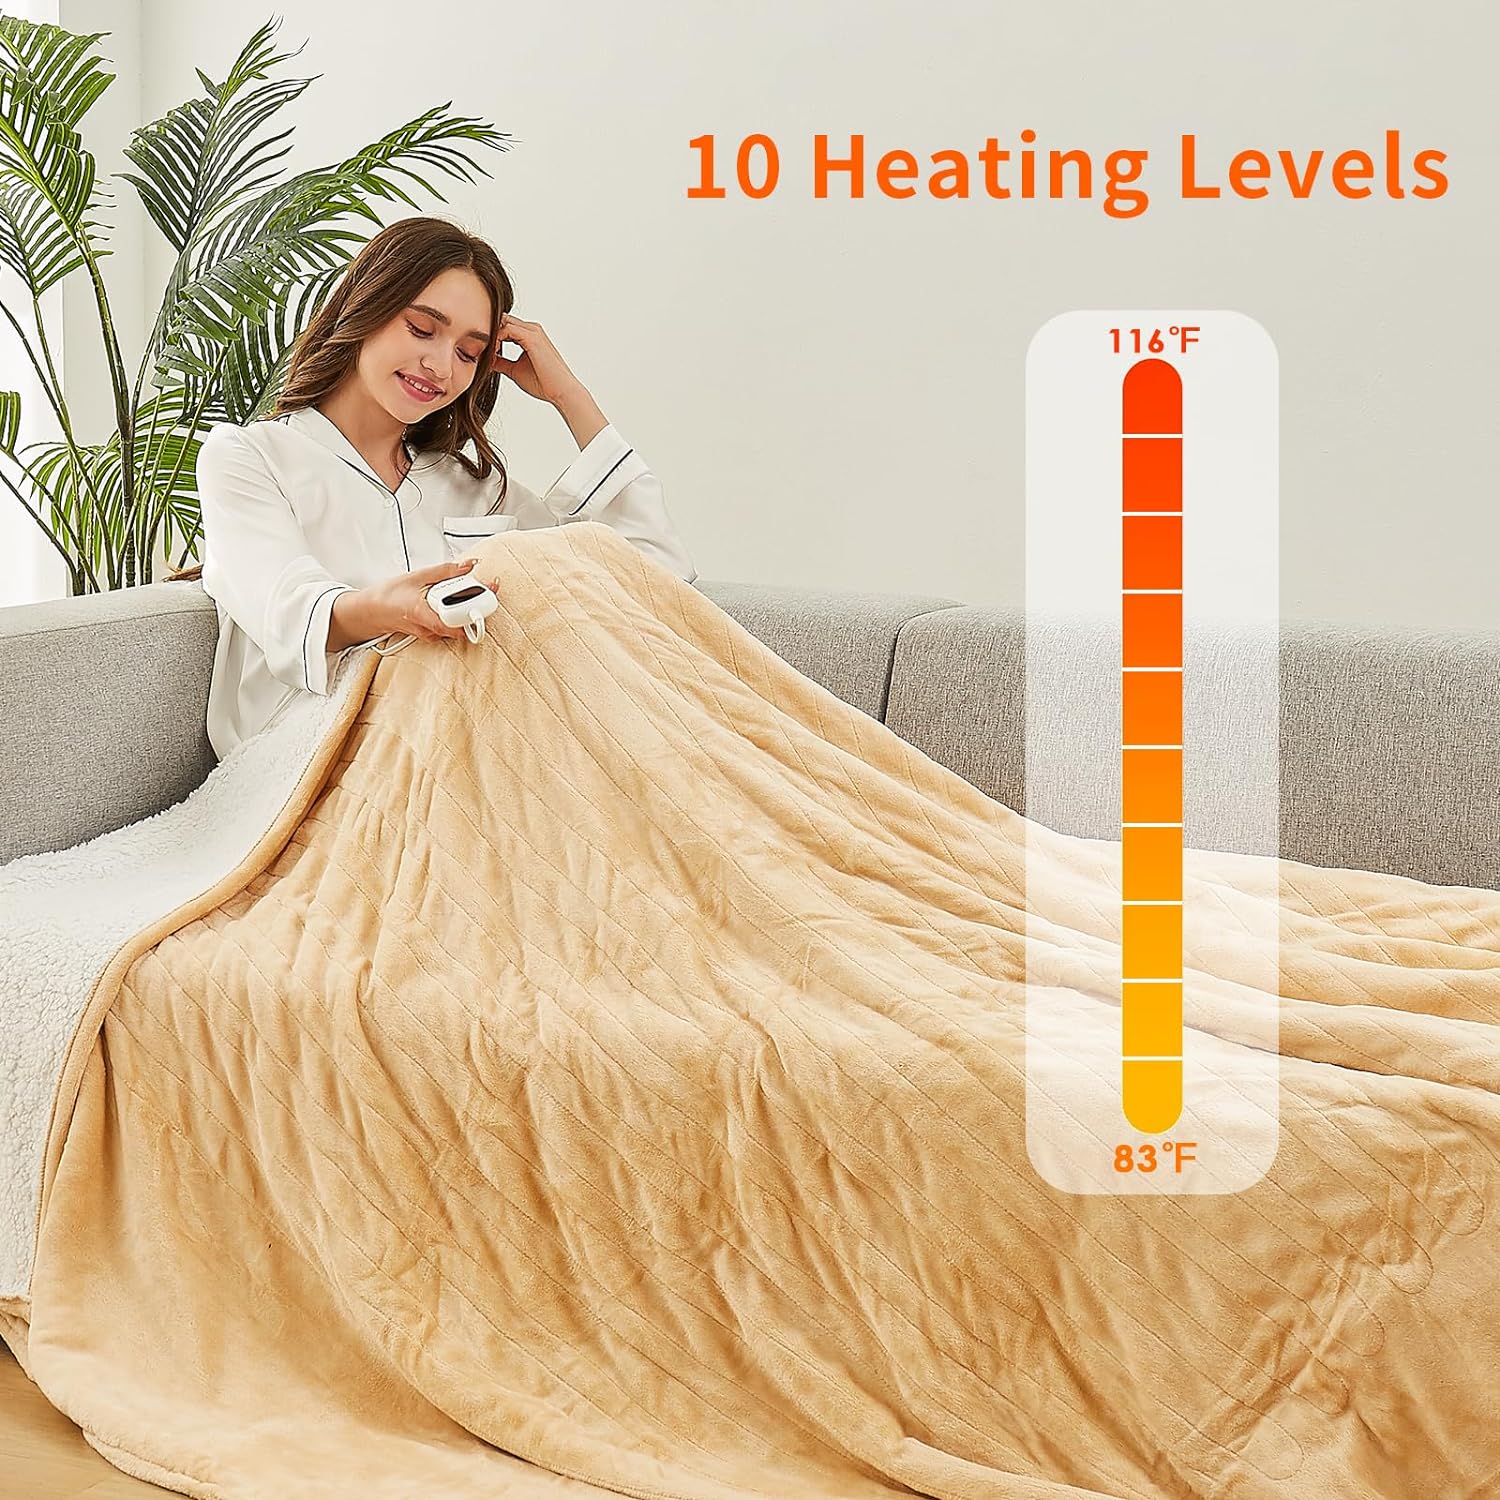 Homemate Electric Heated Blanket Full Size , 72x84 Heating Bed